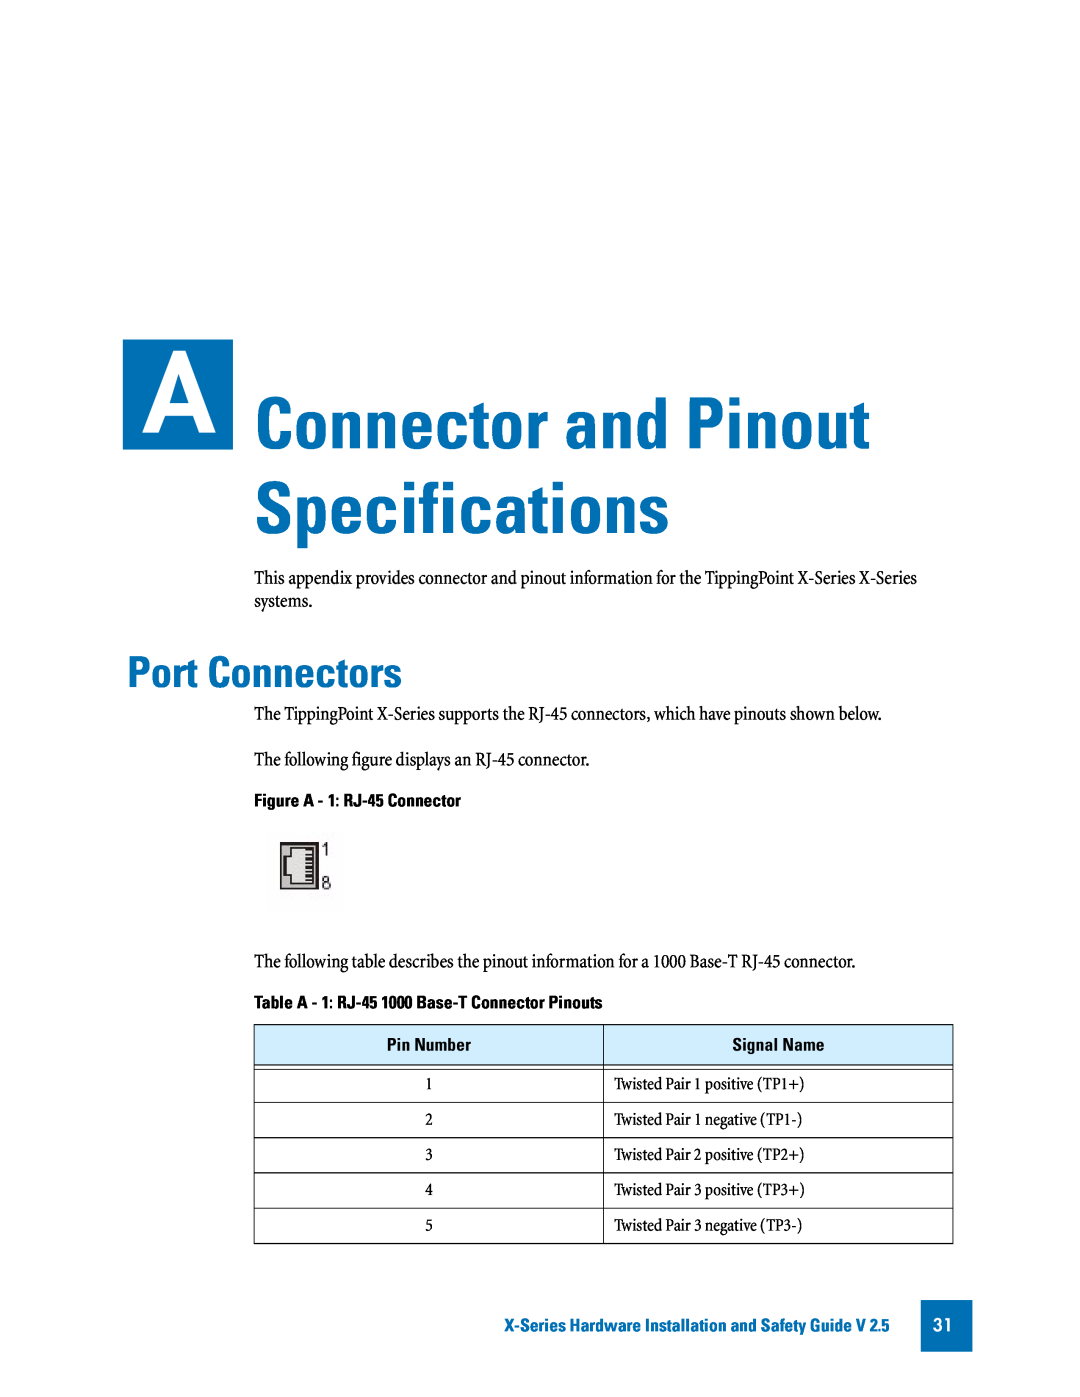 3Com TECHD-0000000122 manual Port Connectors, Connector and Pinout Specifications 